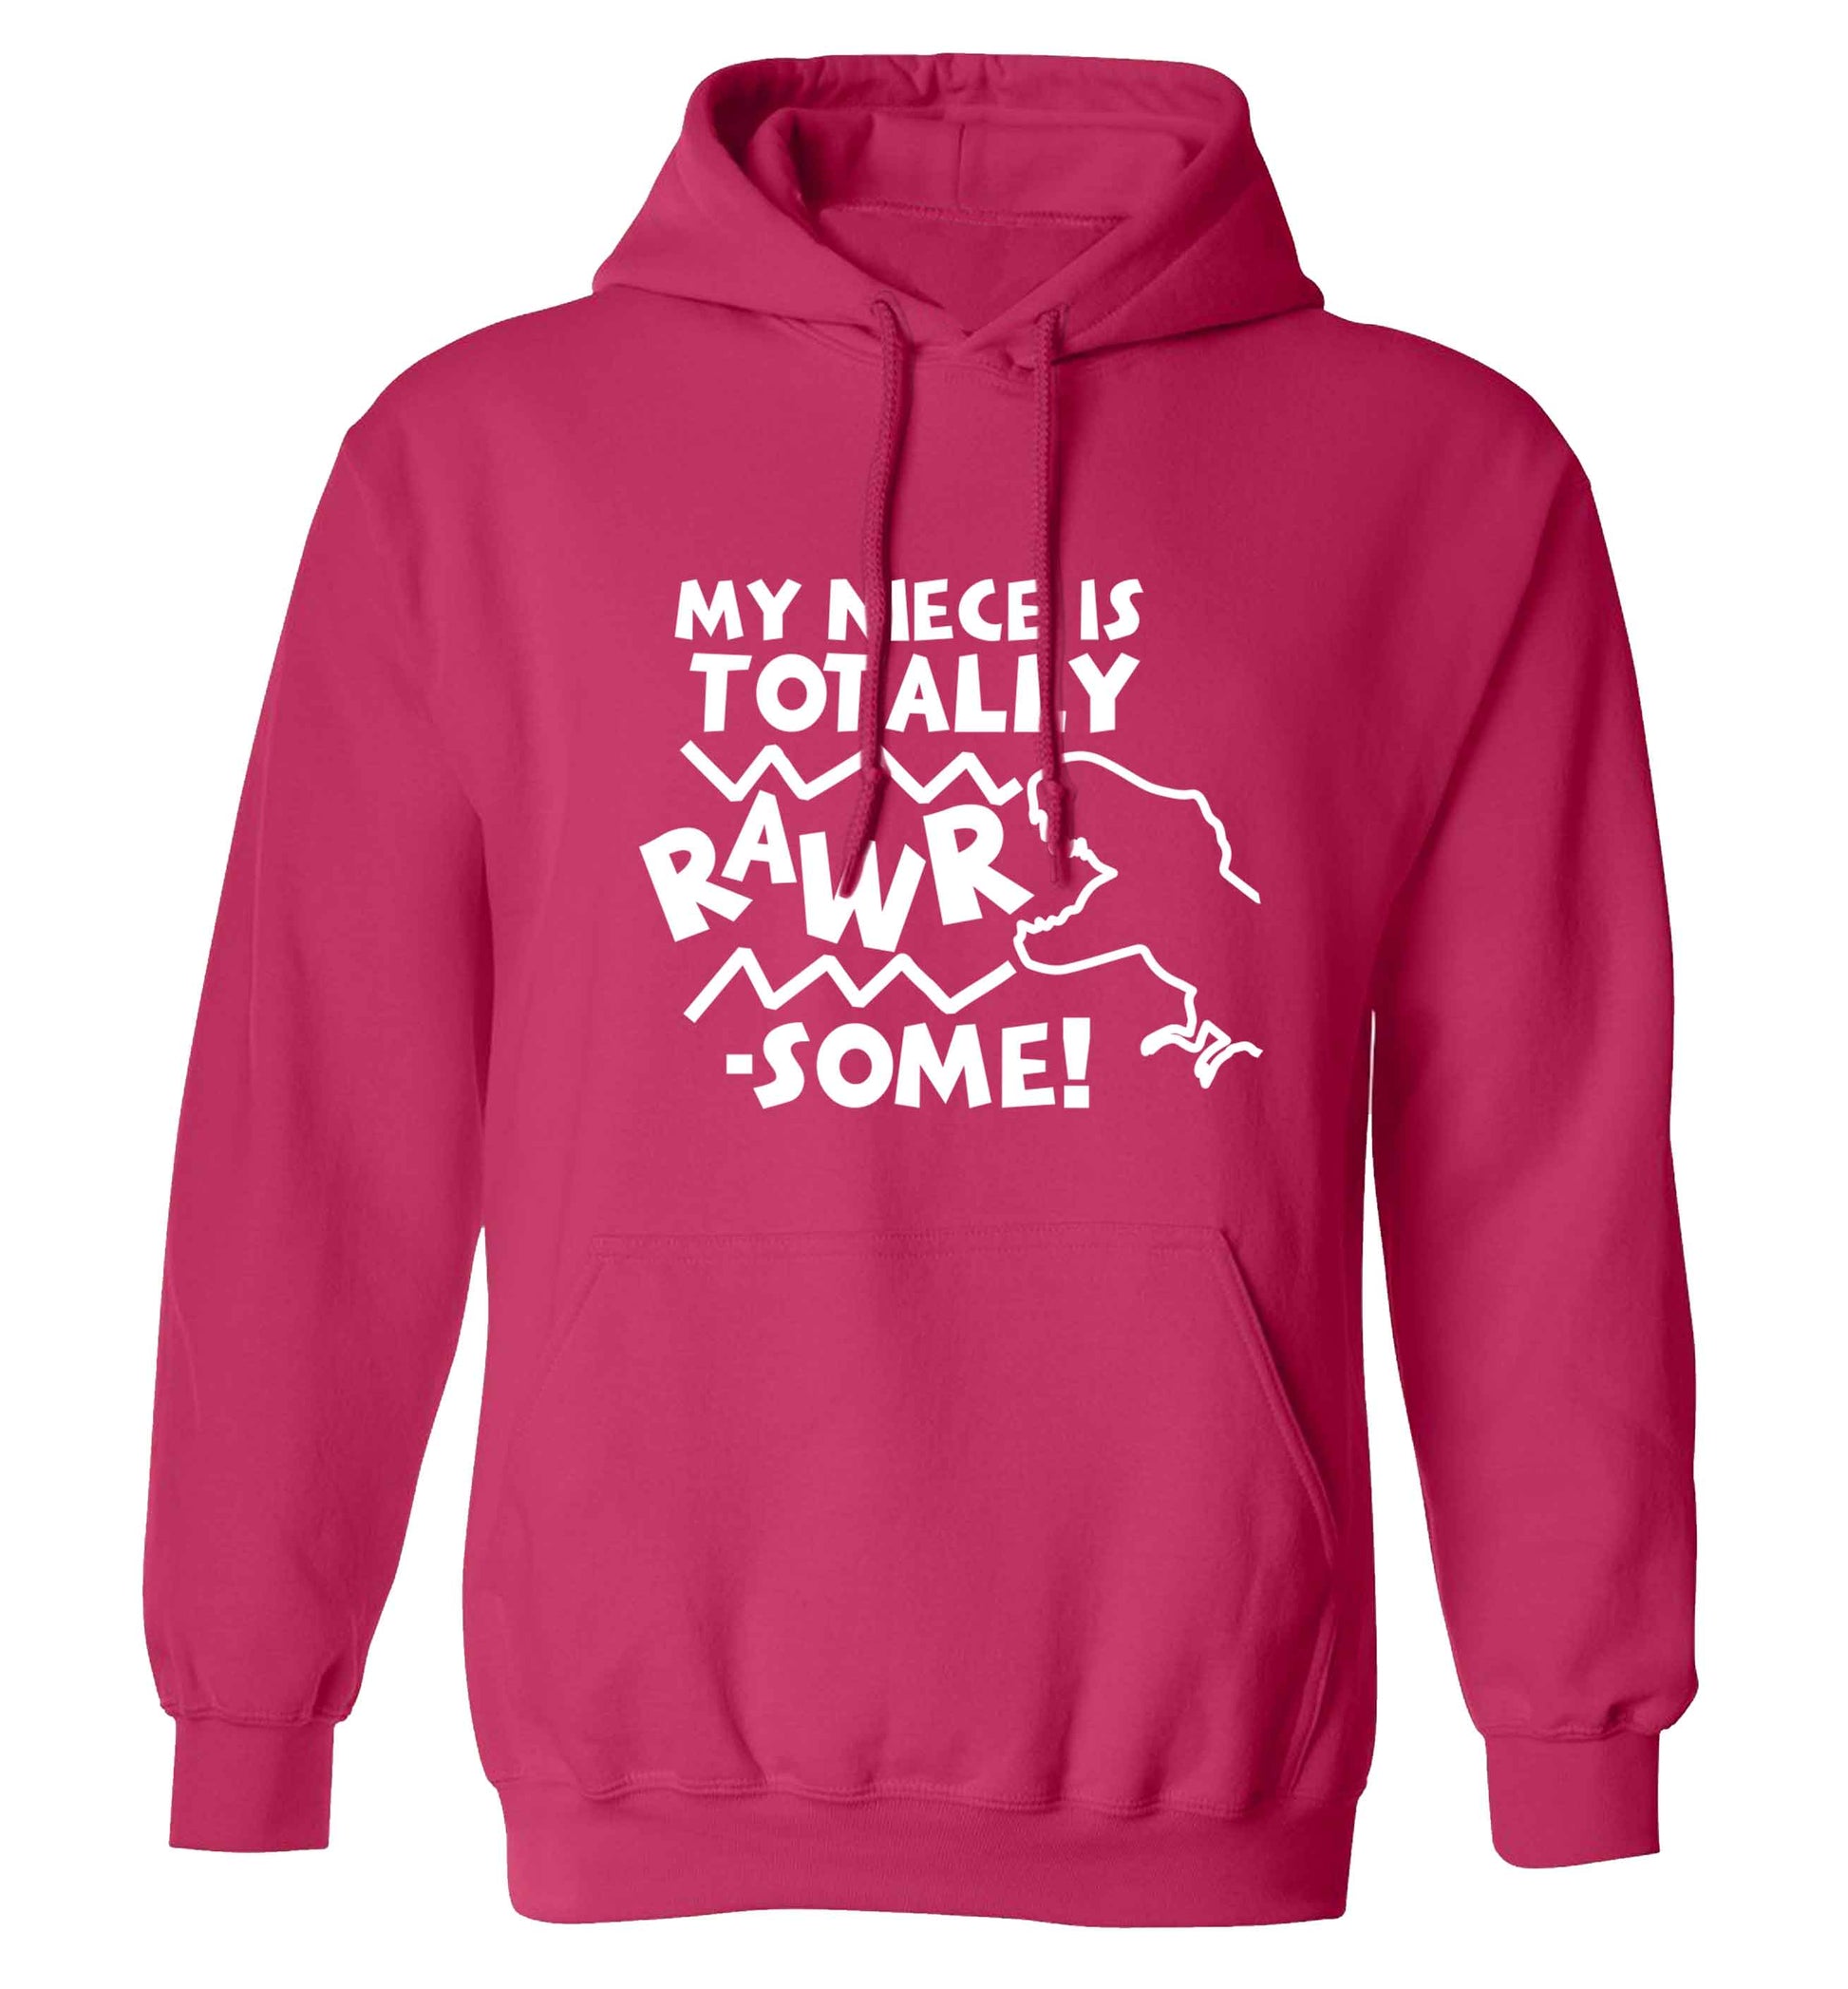 My niece is totally rawrsome adults unisex pink hoodie 2XL